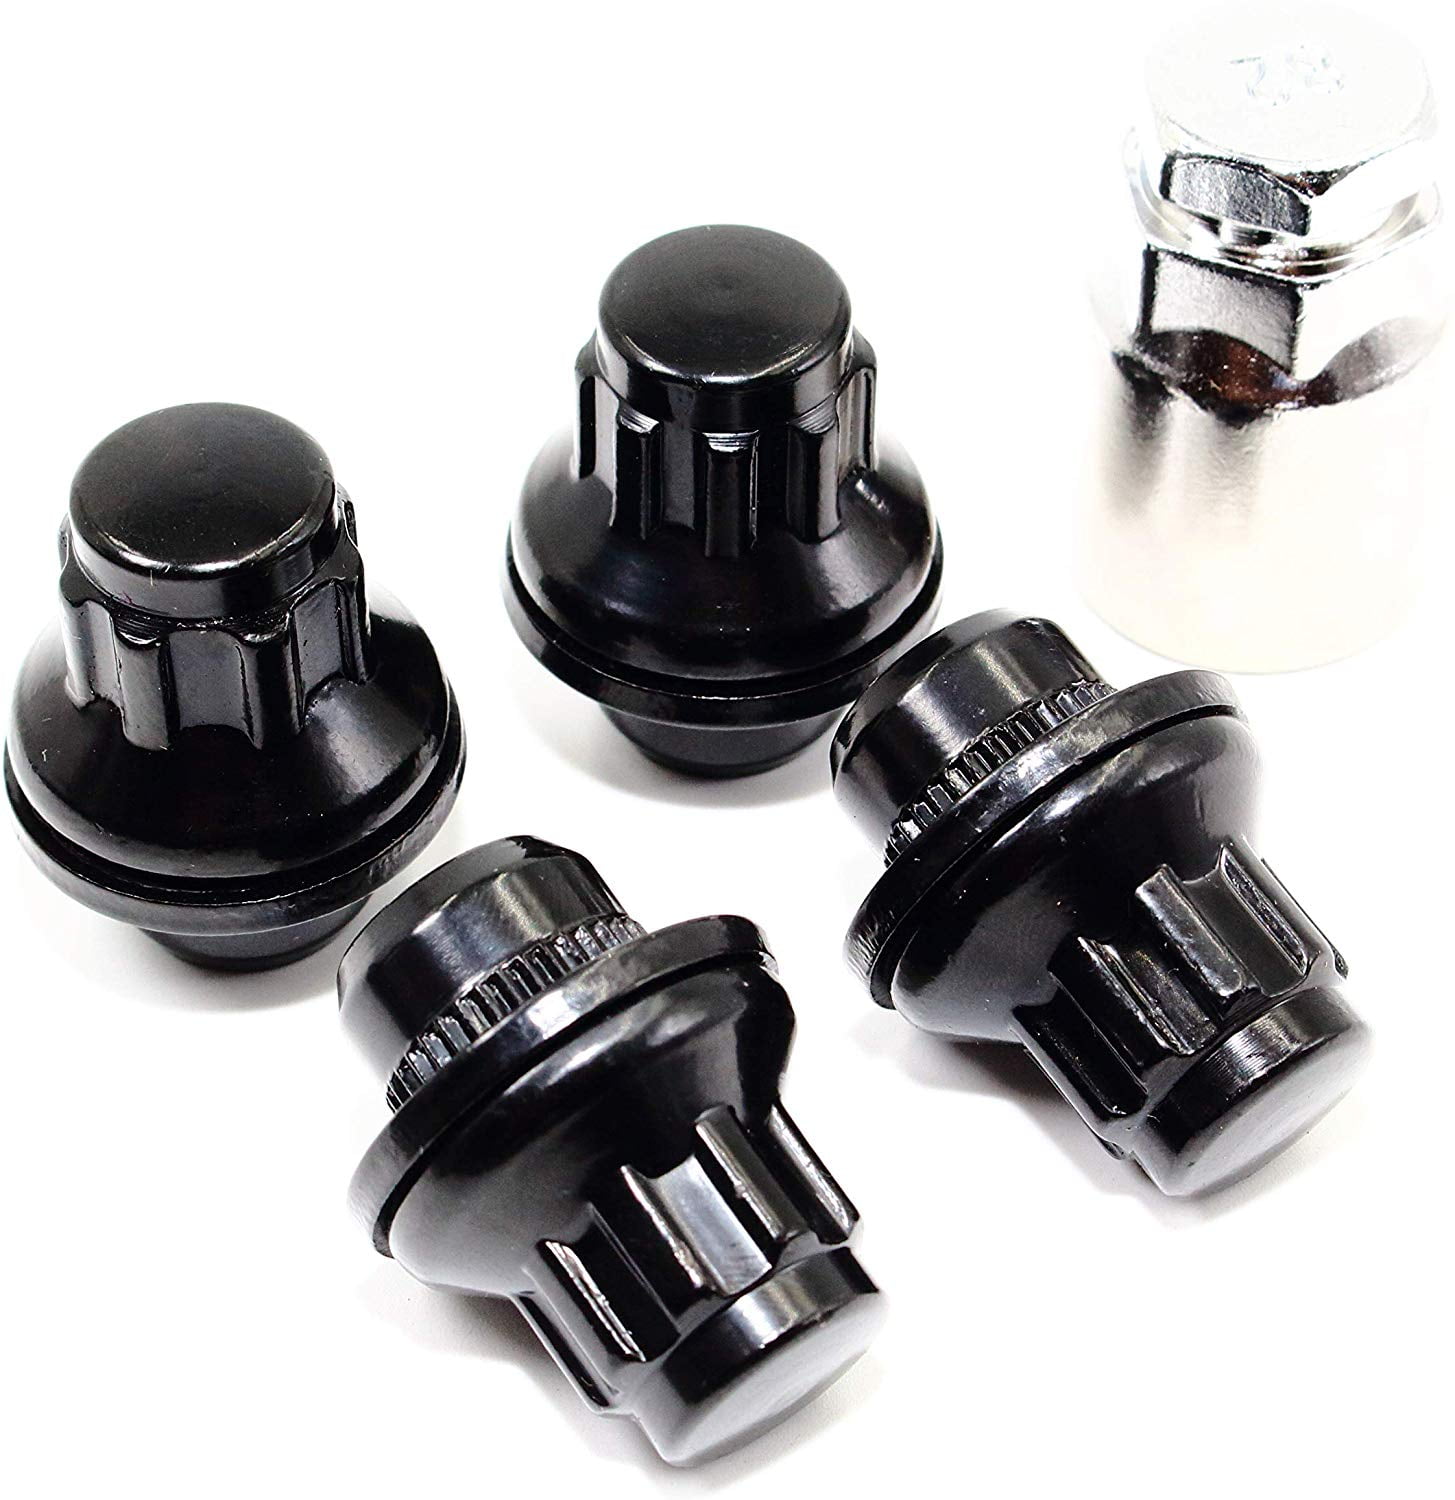 Locking Wheel Nuts 12x1.5 Bolts Tapered for Toyota Celica Mk6 93-99 